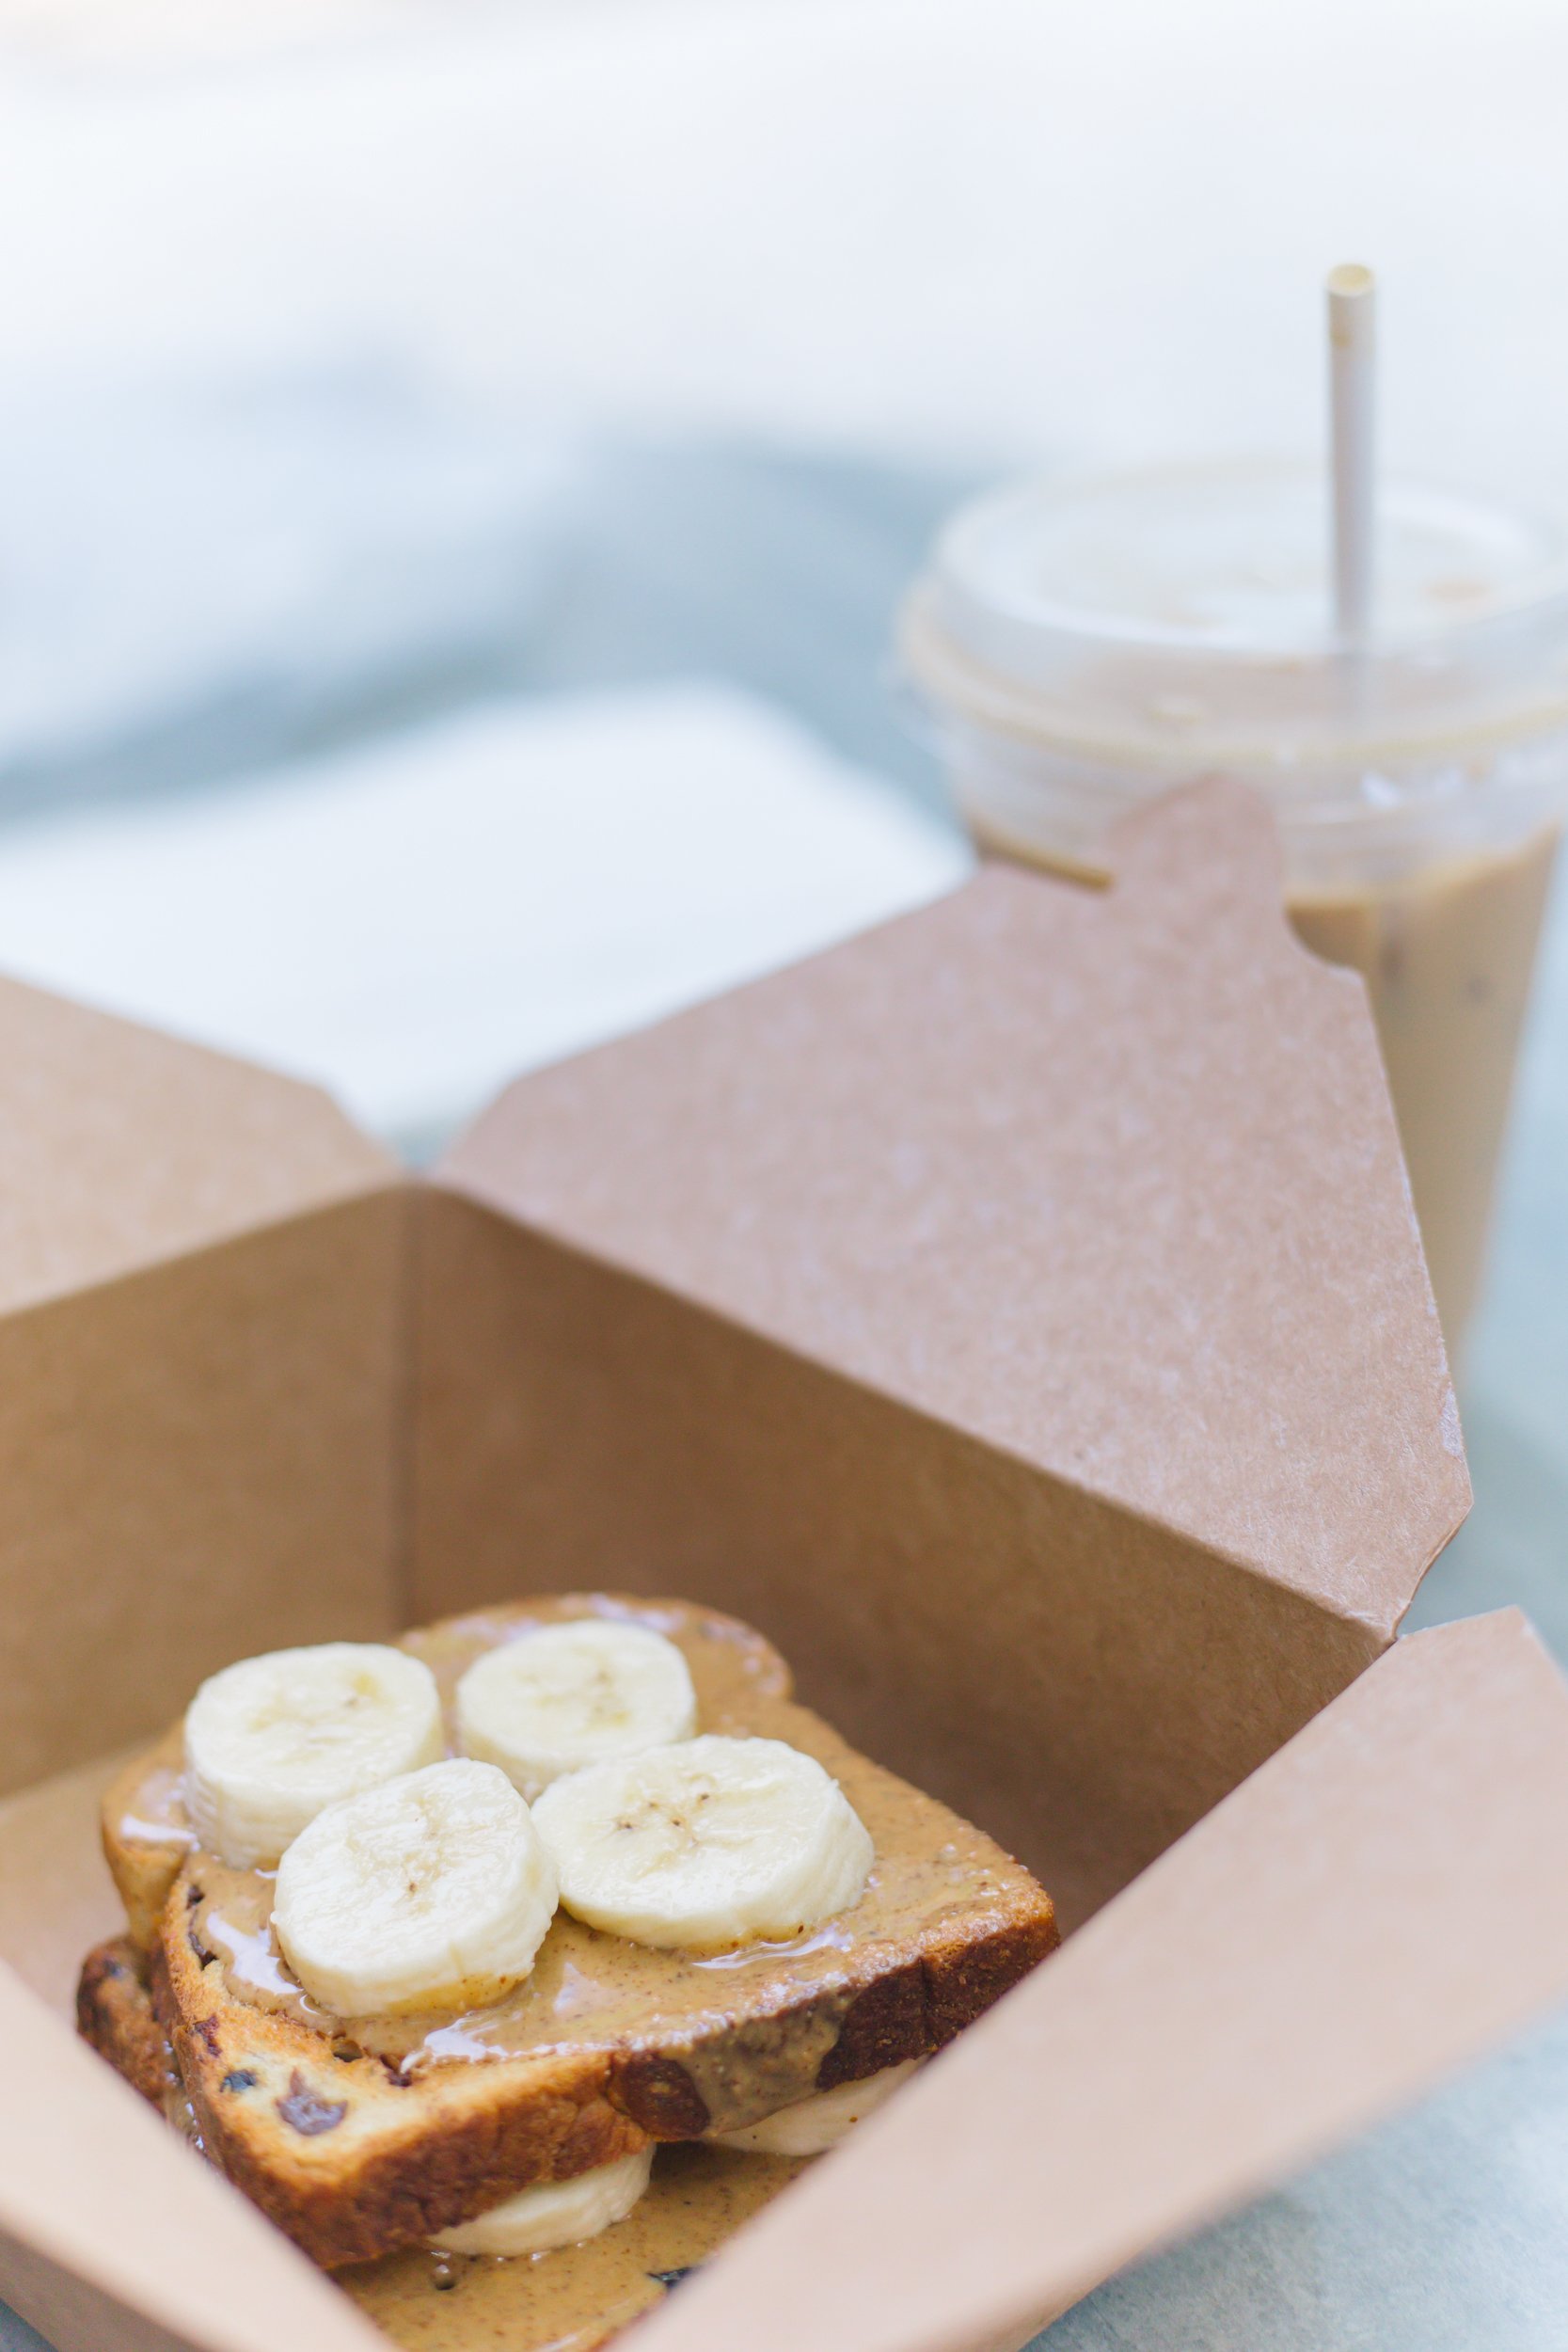 Almond butter toast and an iced latte for breakfast at Java Java